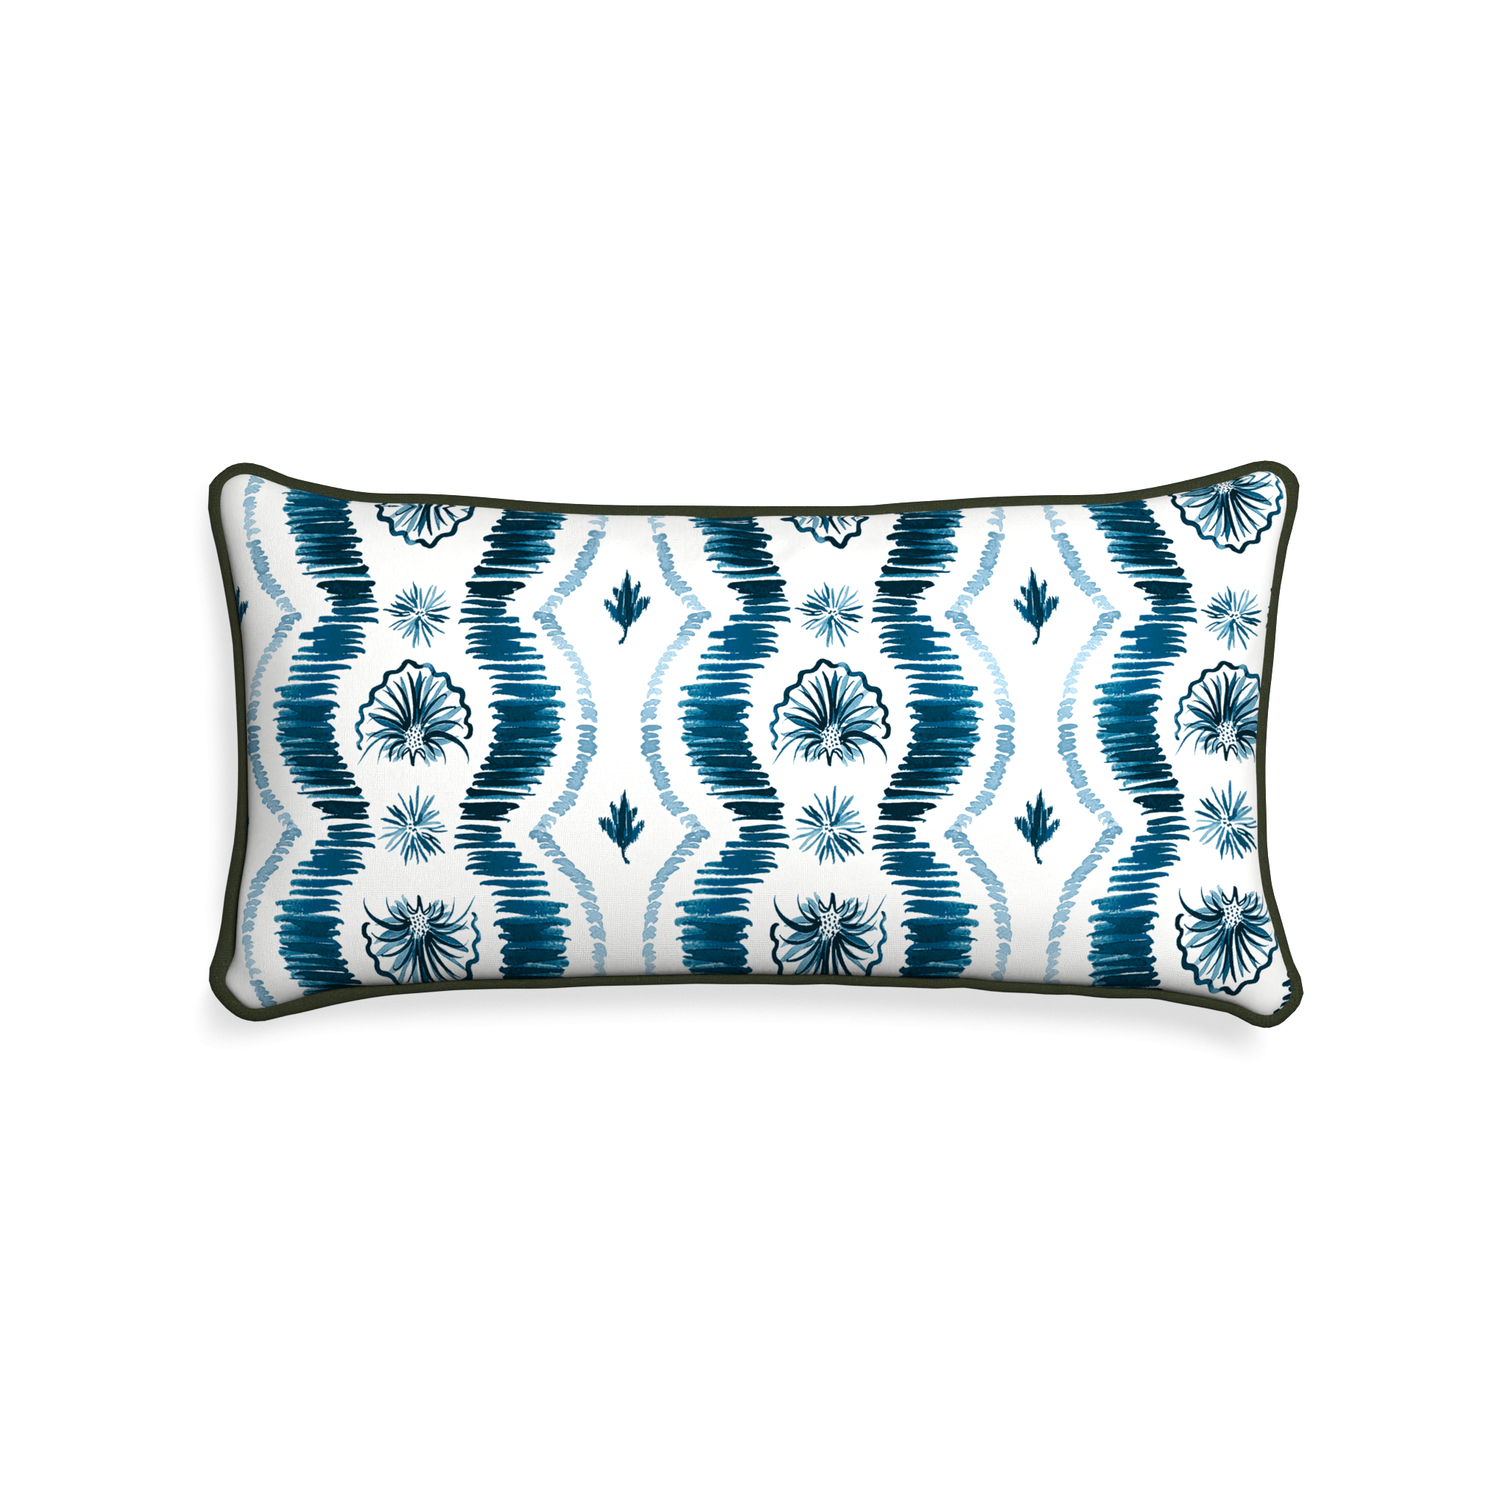 Midi-lumbar alice custom blue ikatpillow with f piping on white background